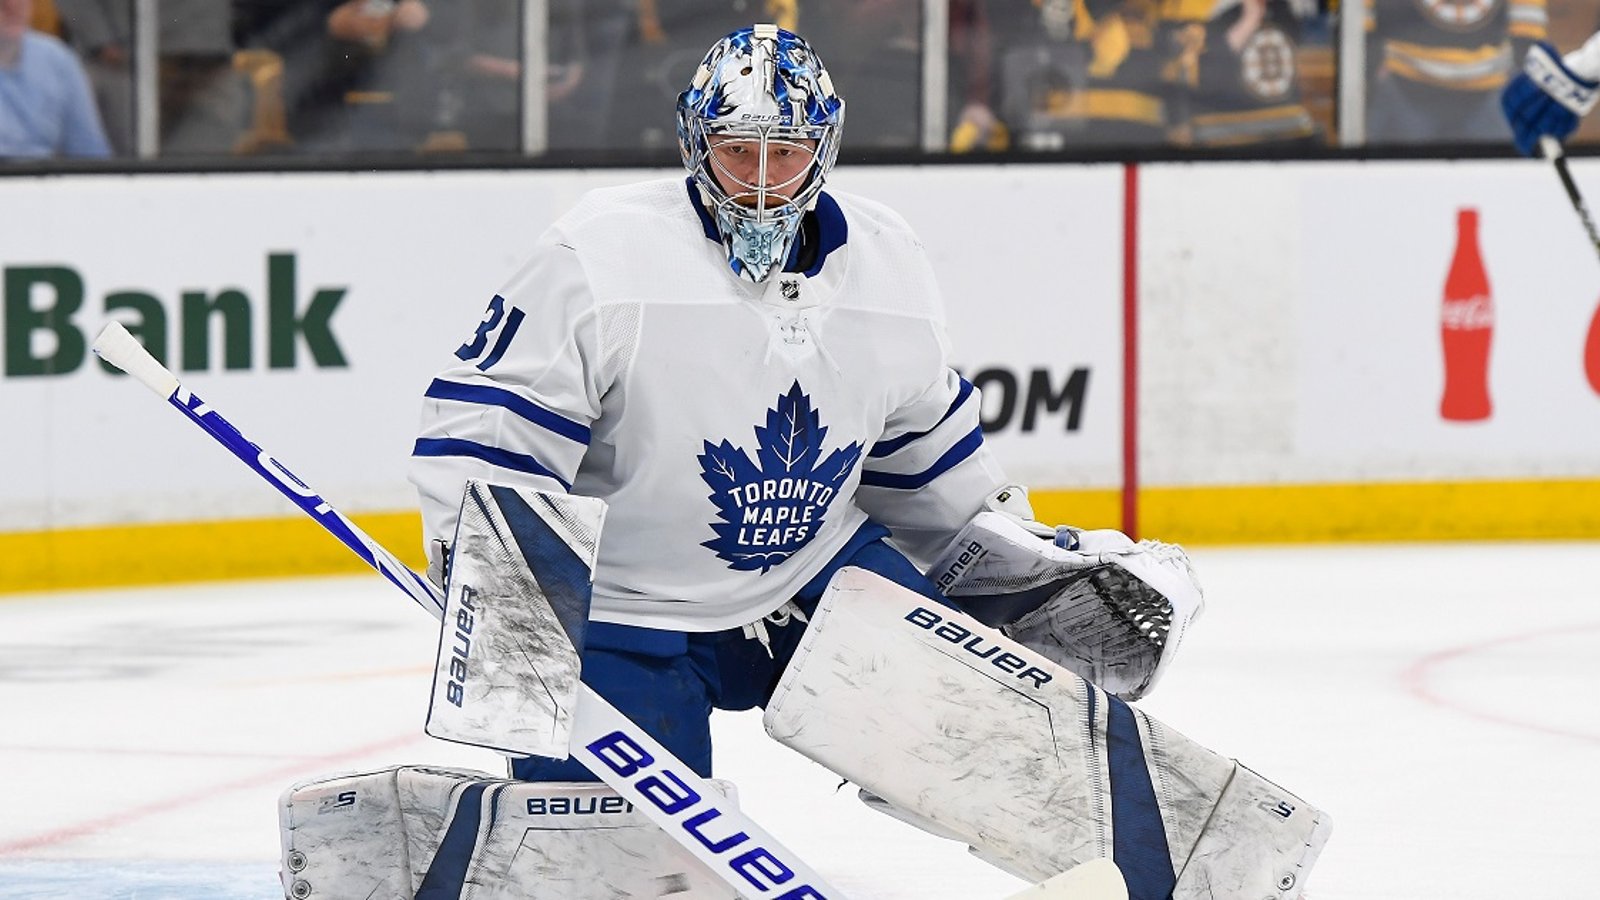 Maple Leafs make 4 changes to their lineup ahead of game against the St. Louis Blues.